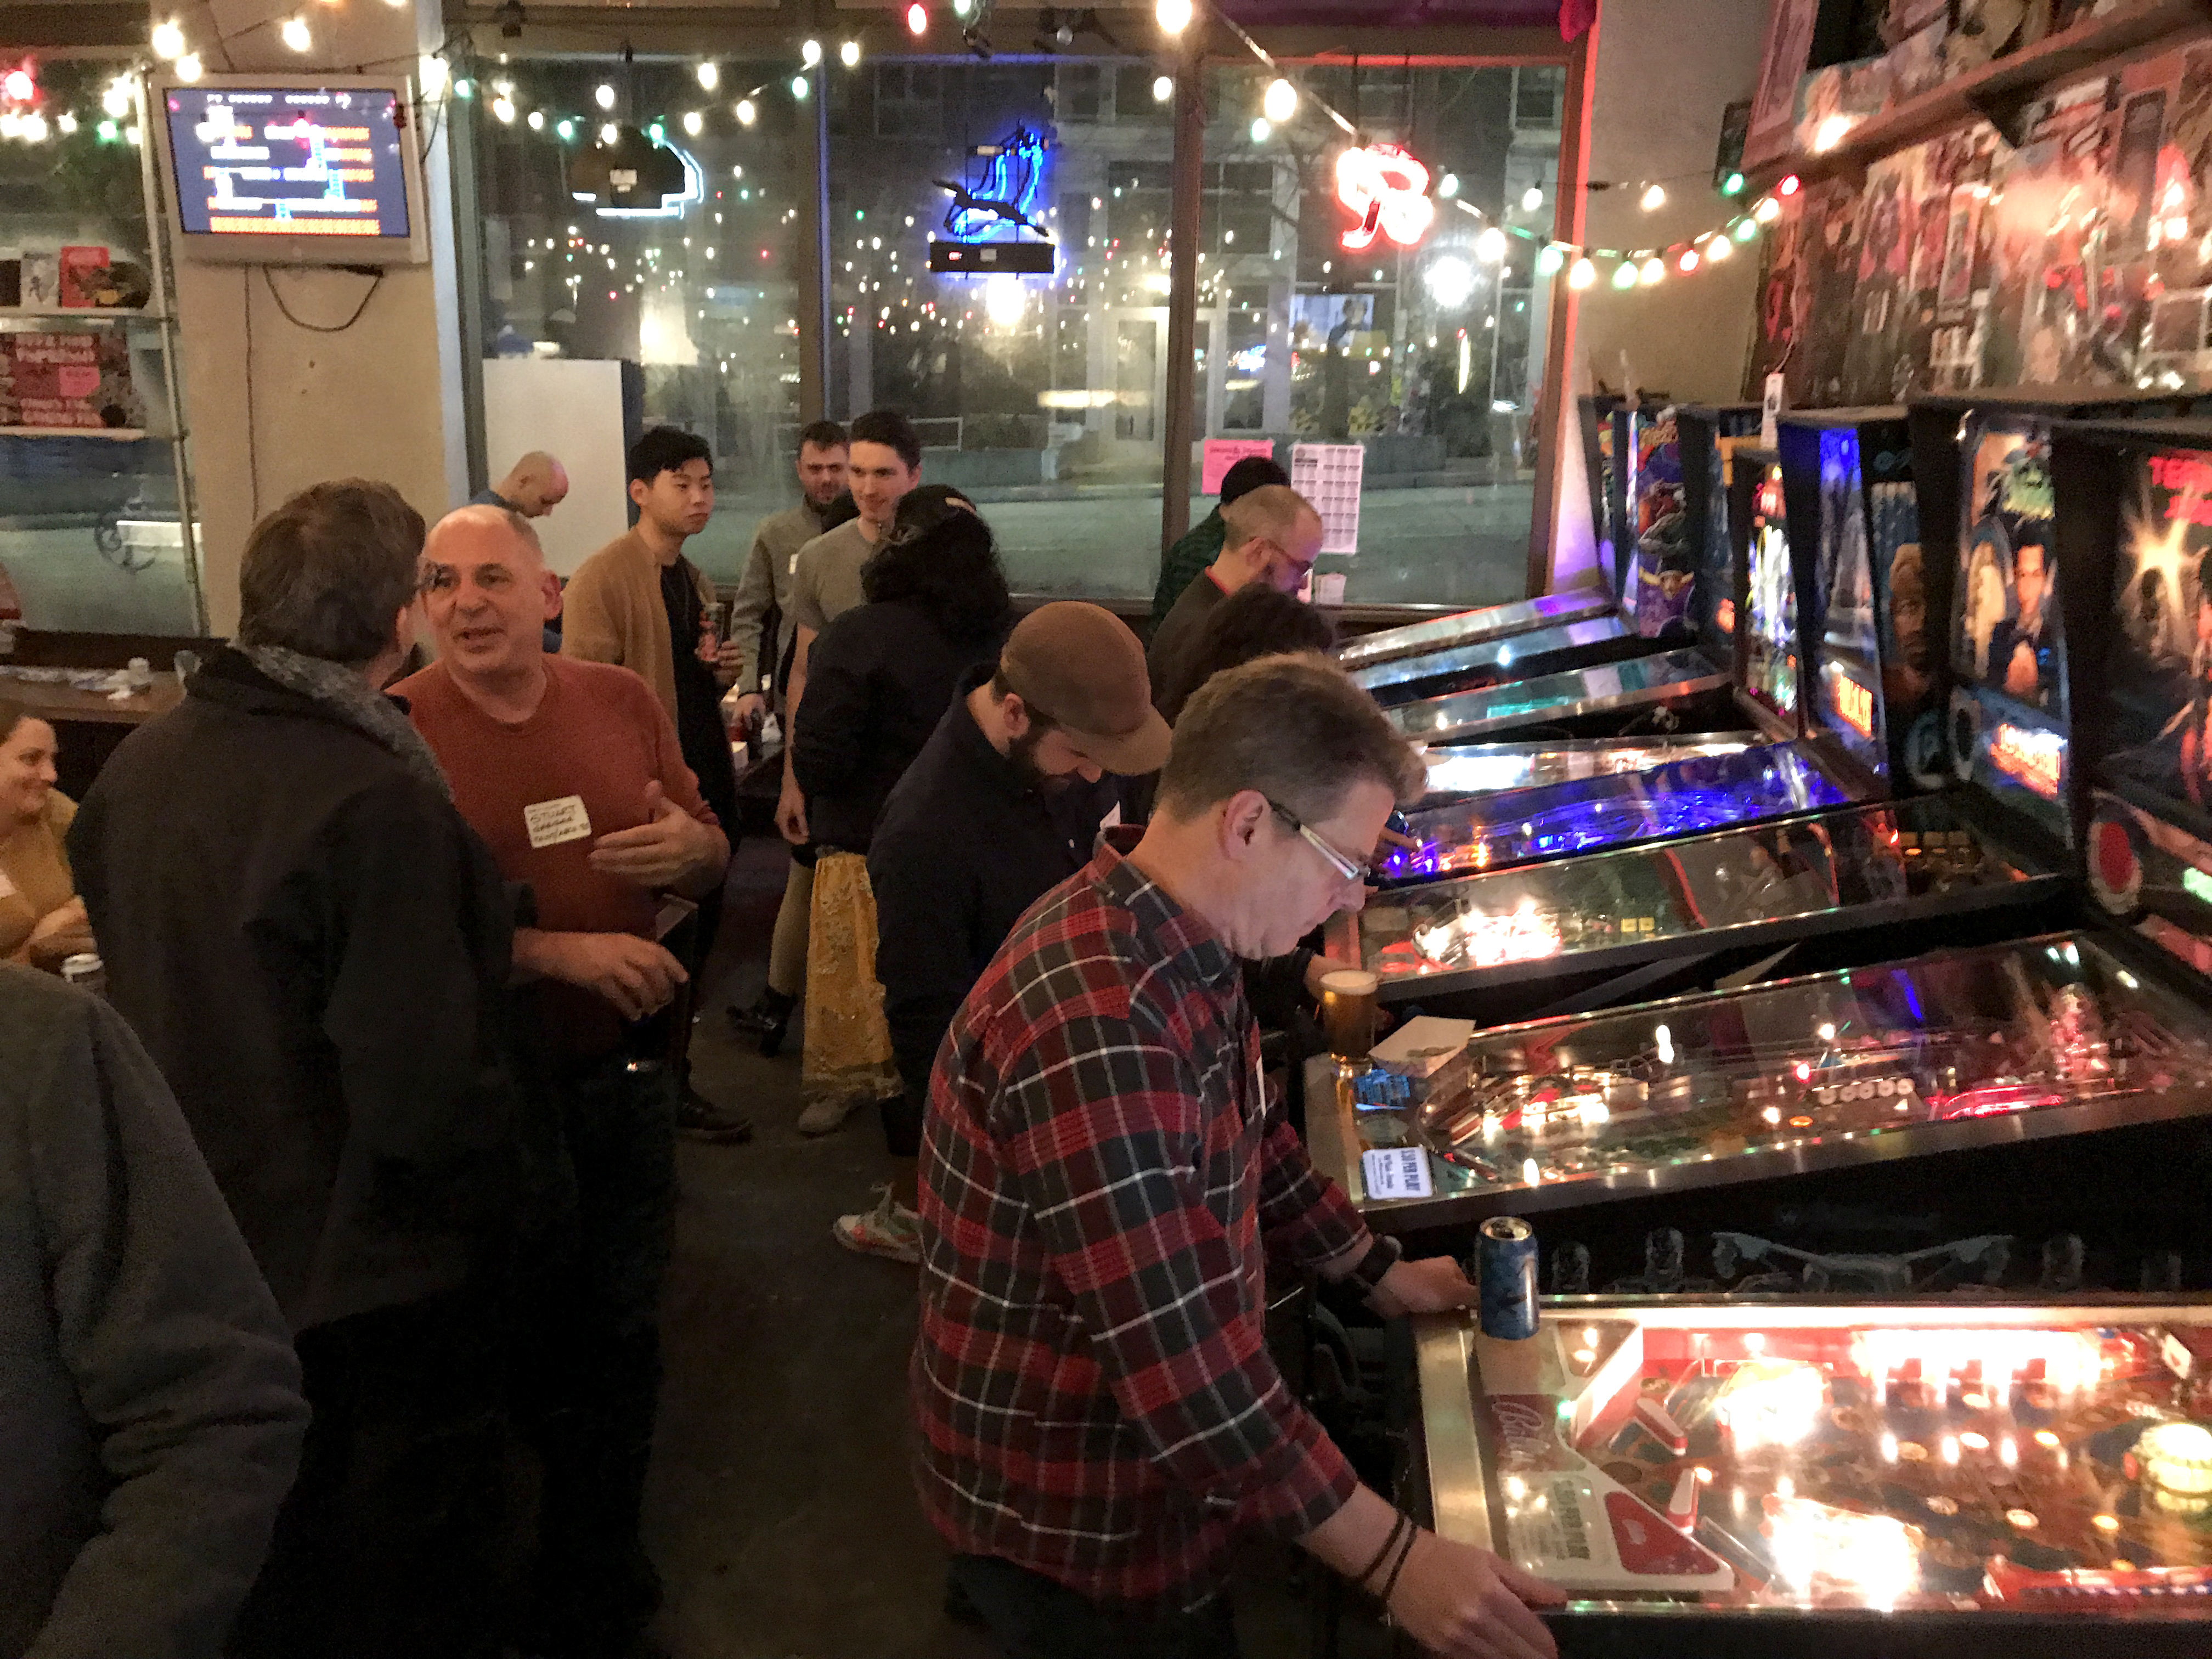 A group of people conversing while others play on pinball machines